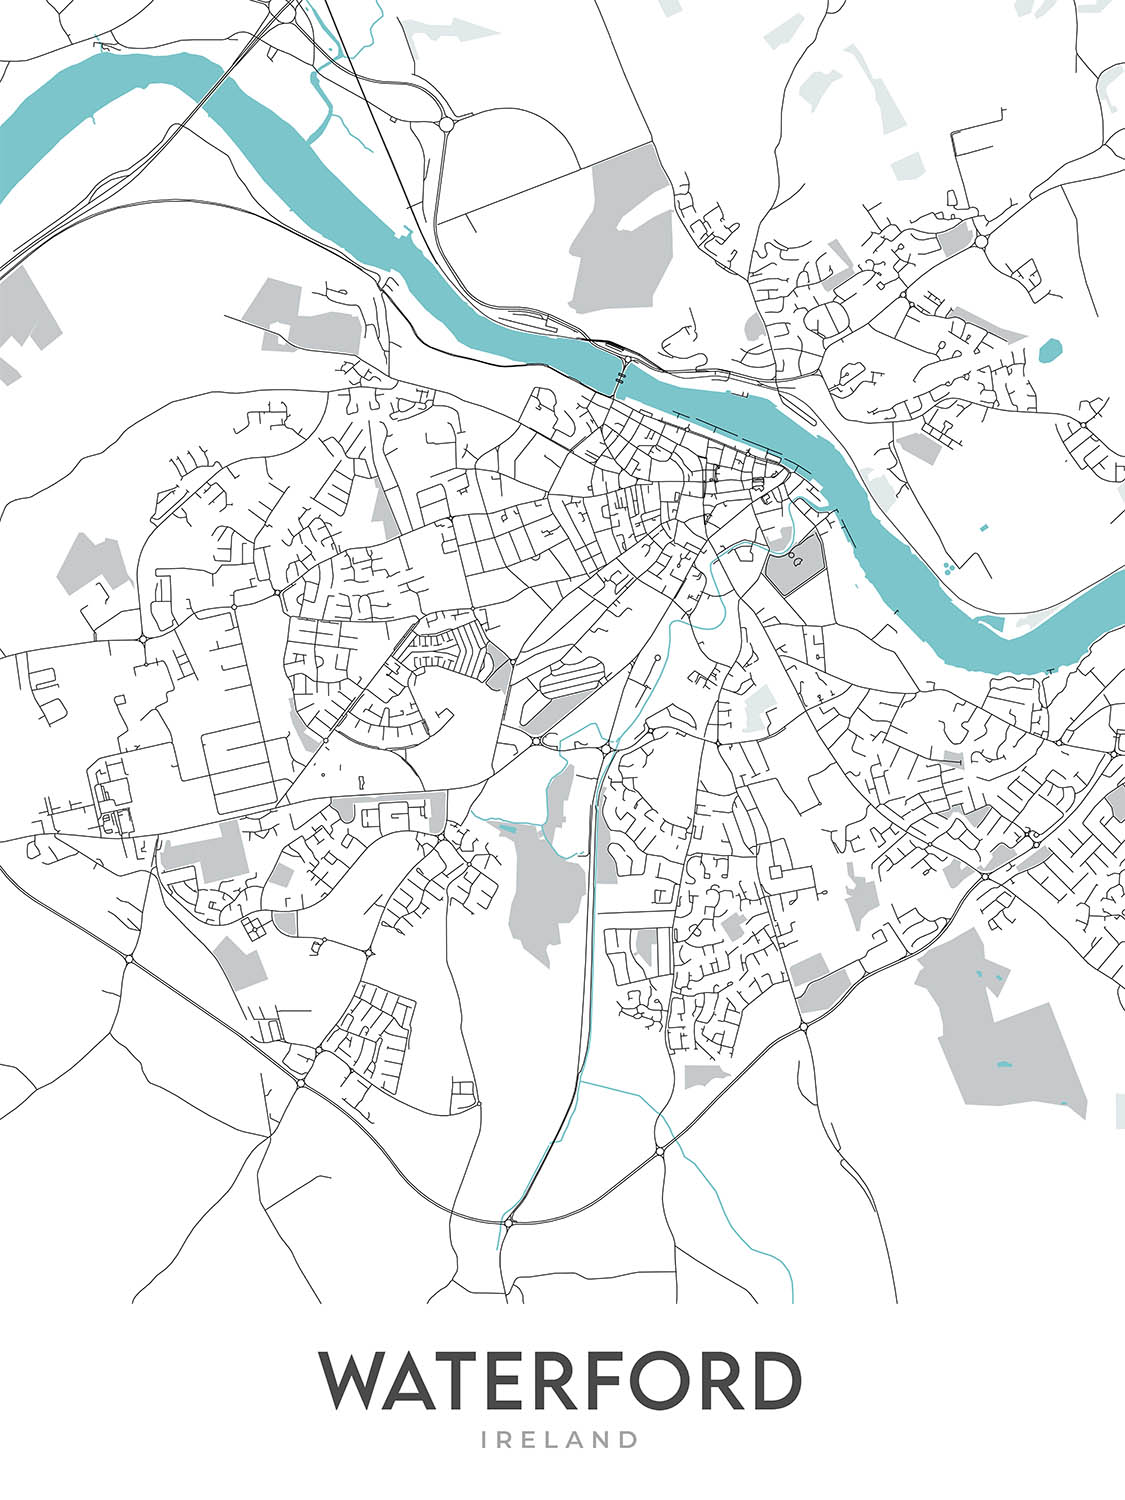 Moderner Stadtplan von Waterford, Irland: Waterford Castle, Reginald's Tower, Christ Church Cathedral, Holy Trinity Cathedral, River Suir